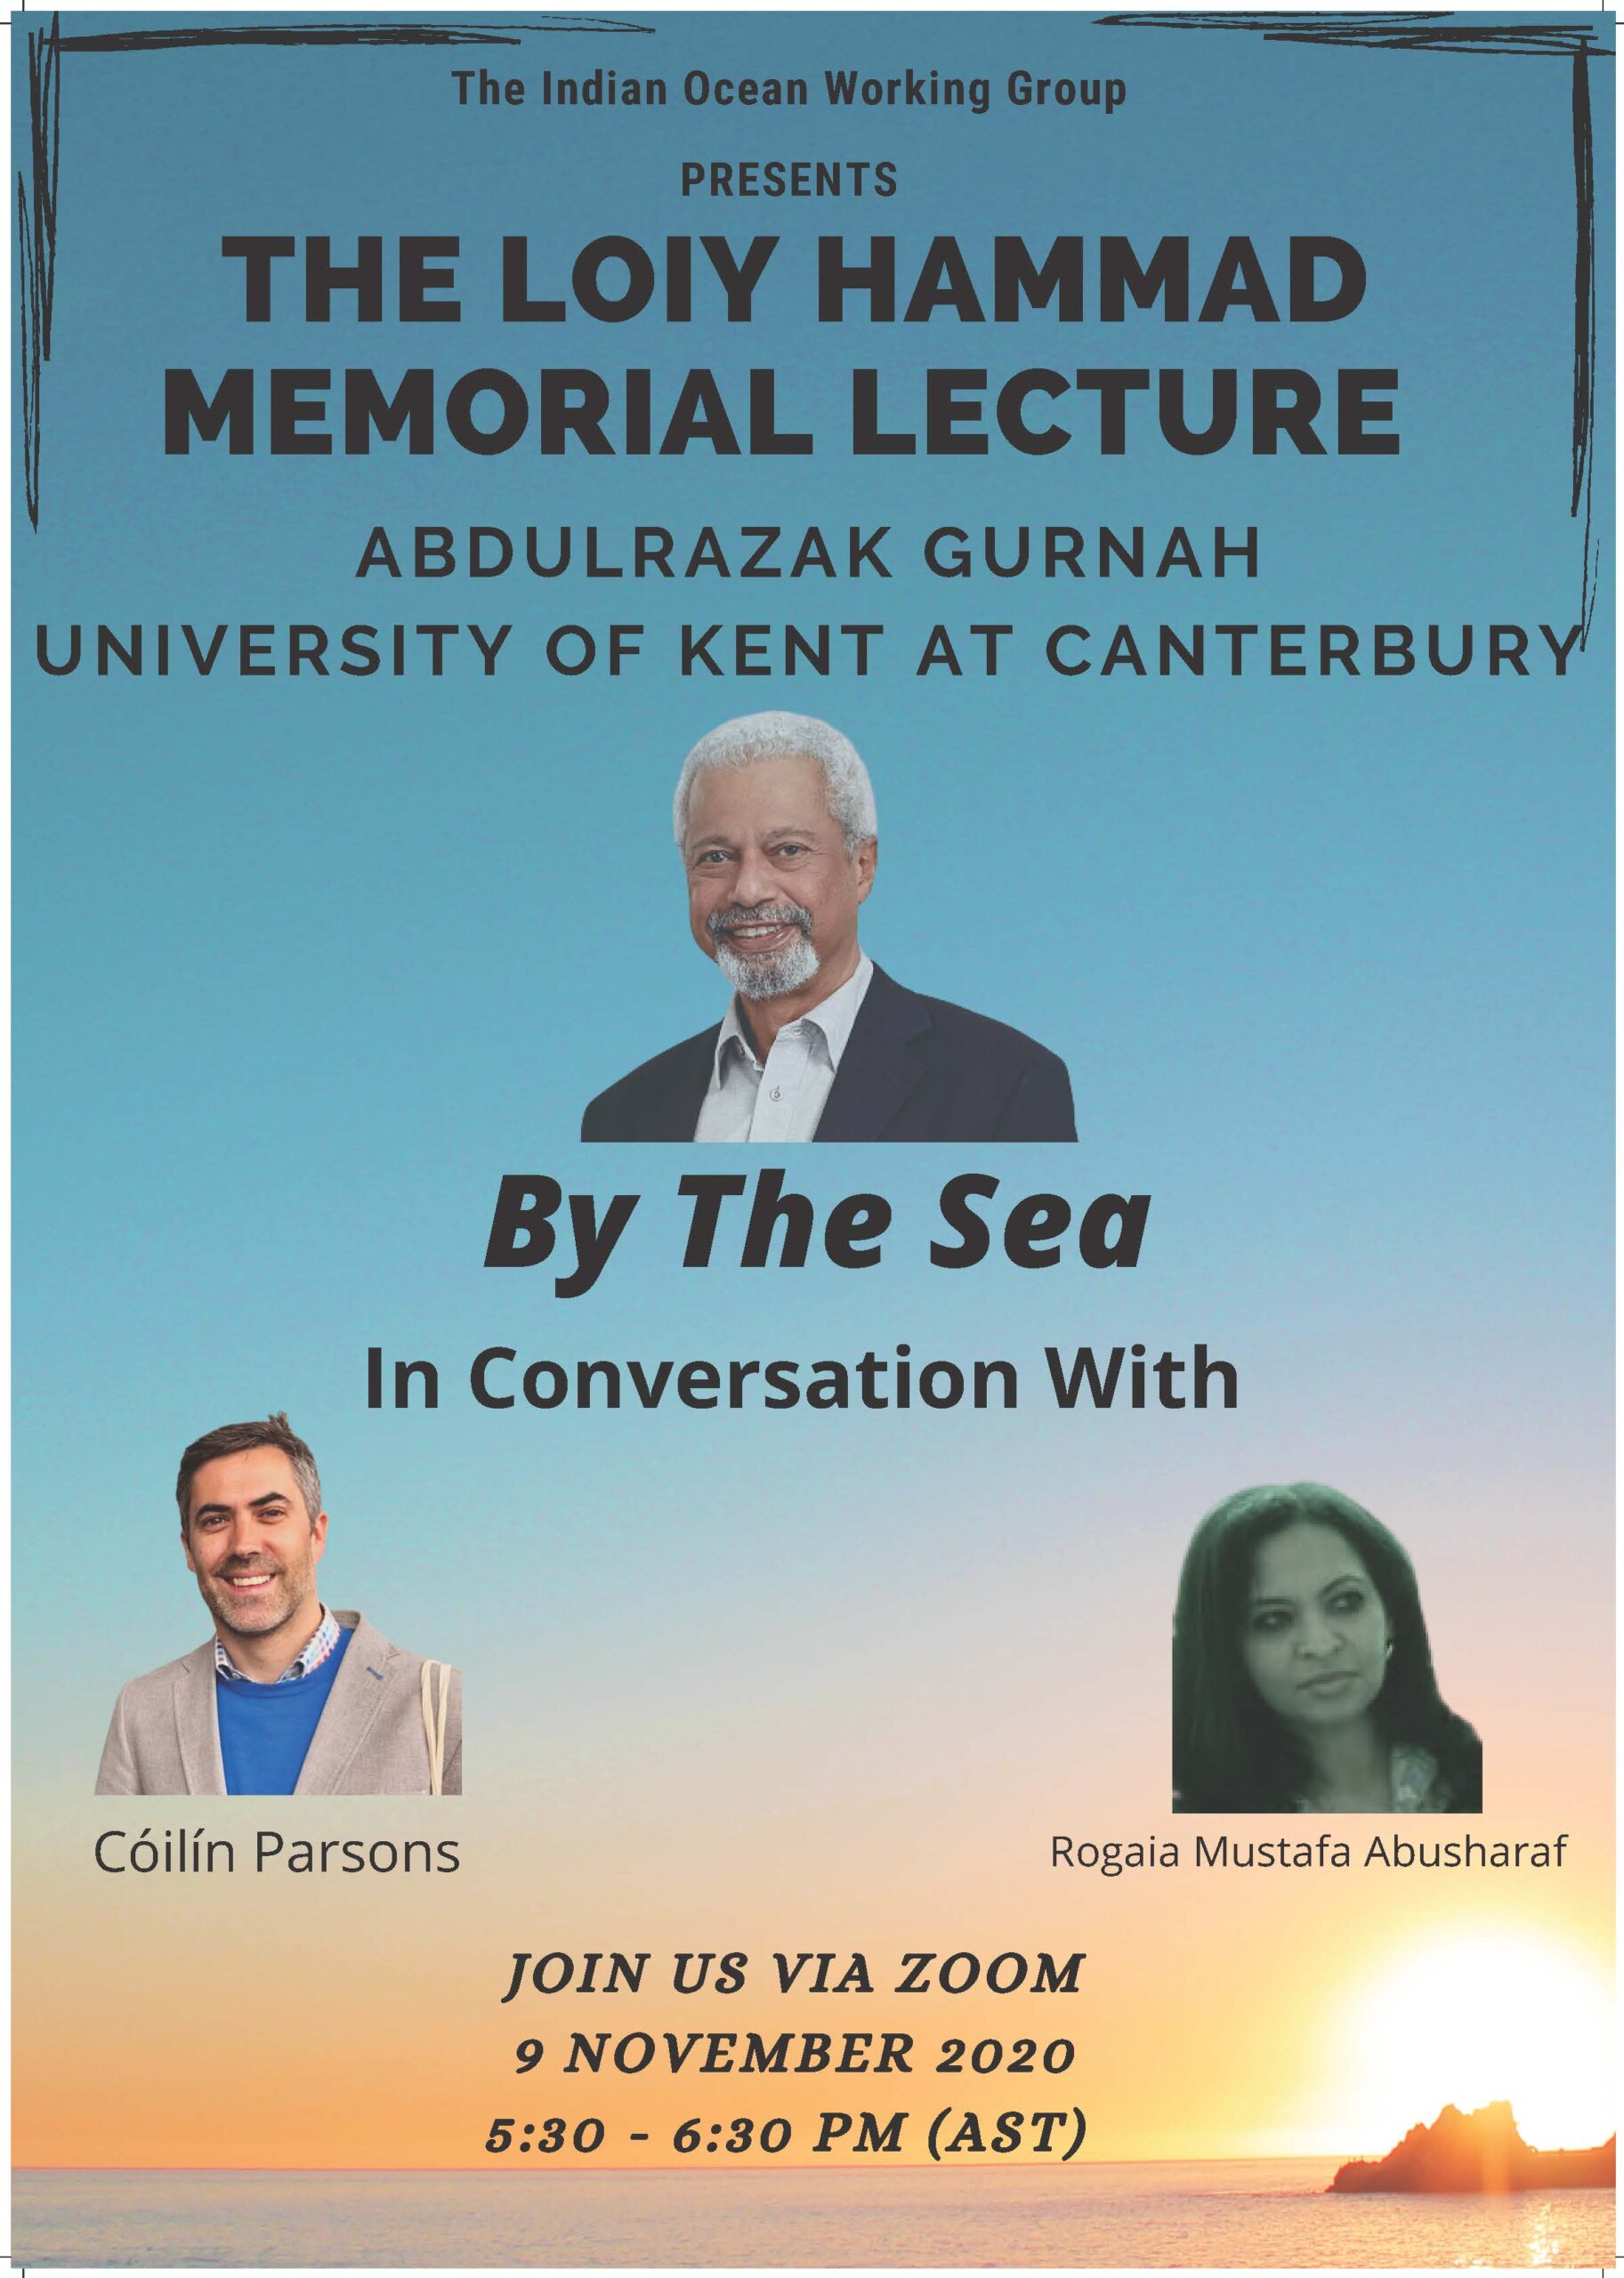 The Loiy Hammad Memorial Lecture: By The Sea